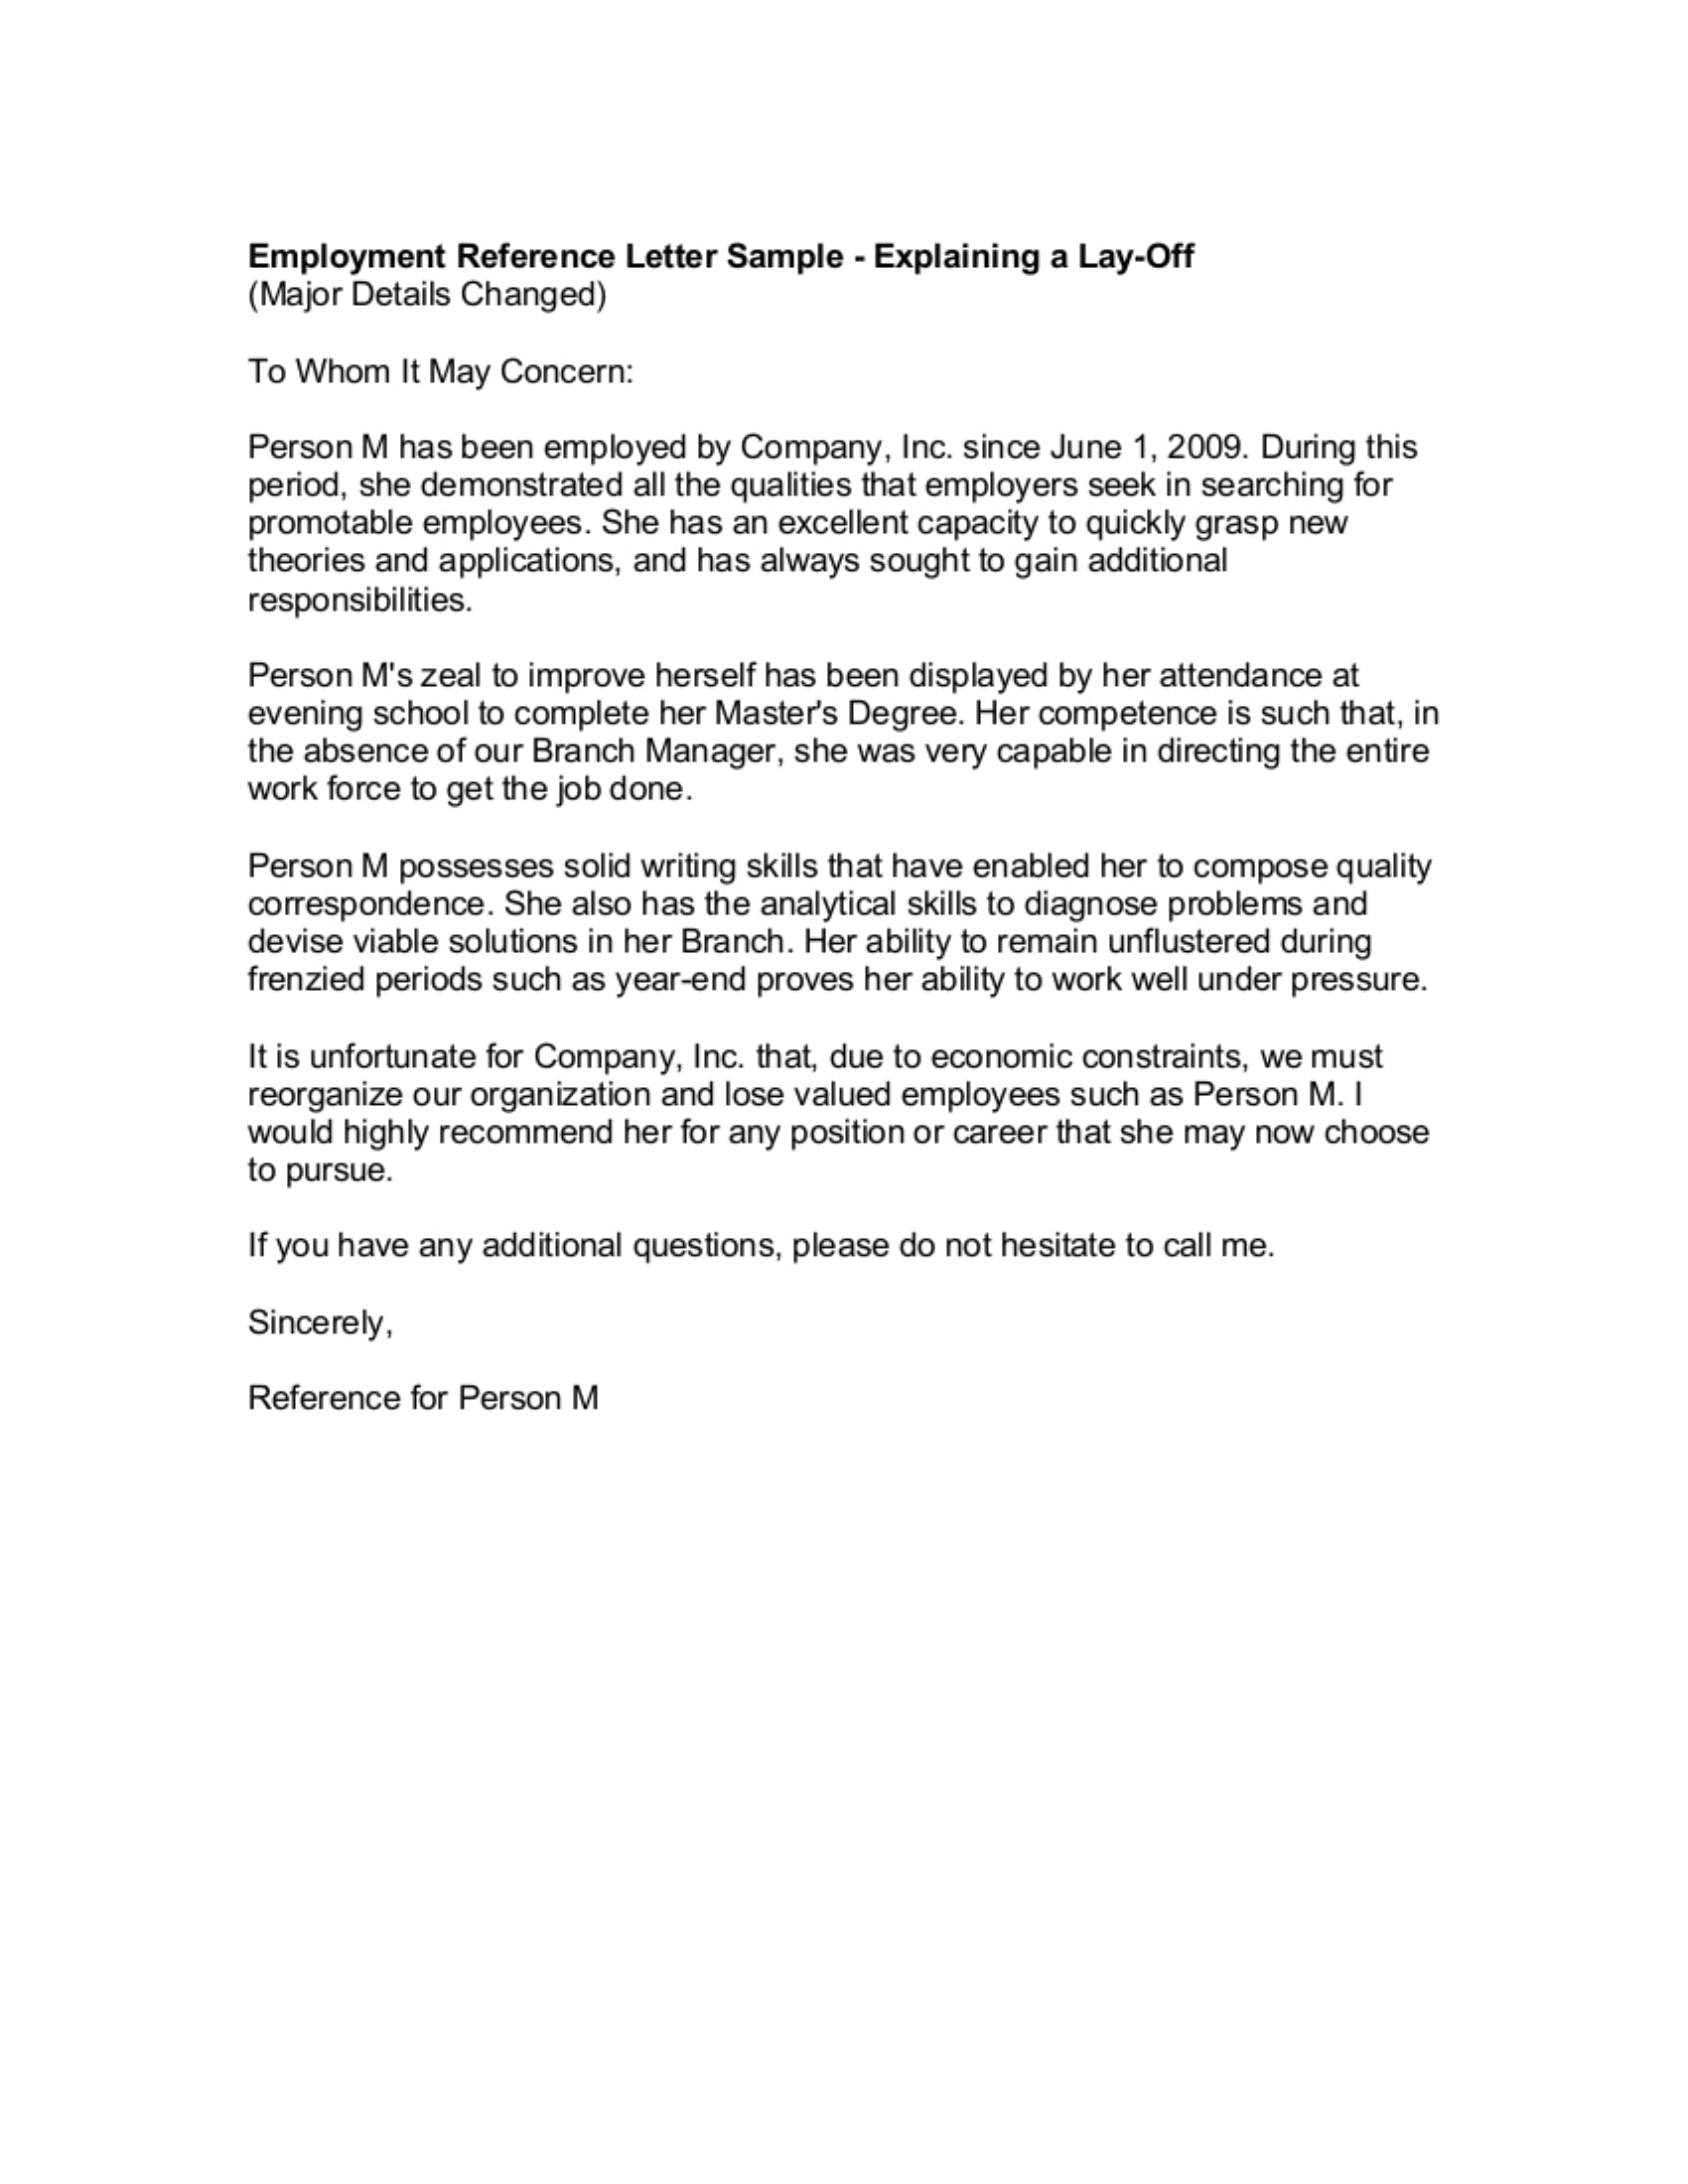 Employer Reference Letter Debandje within dimensions 1700 X 2200